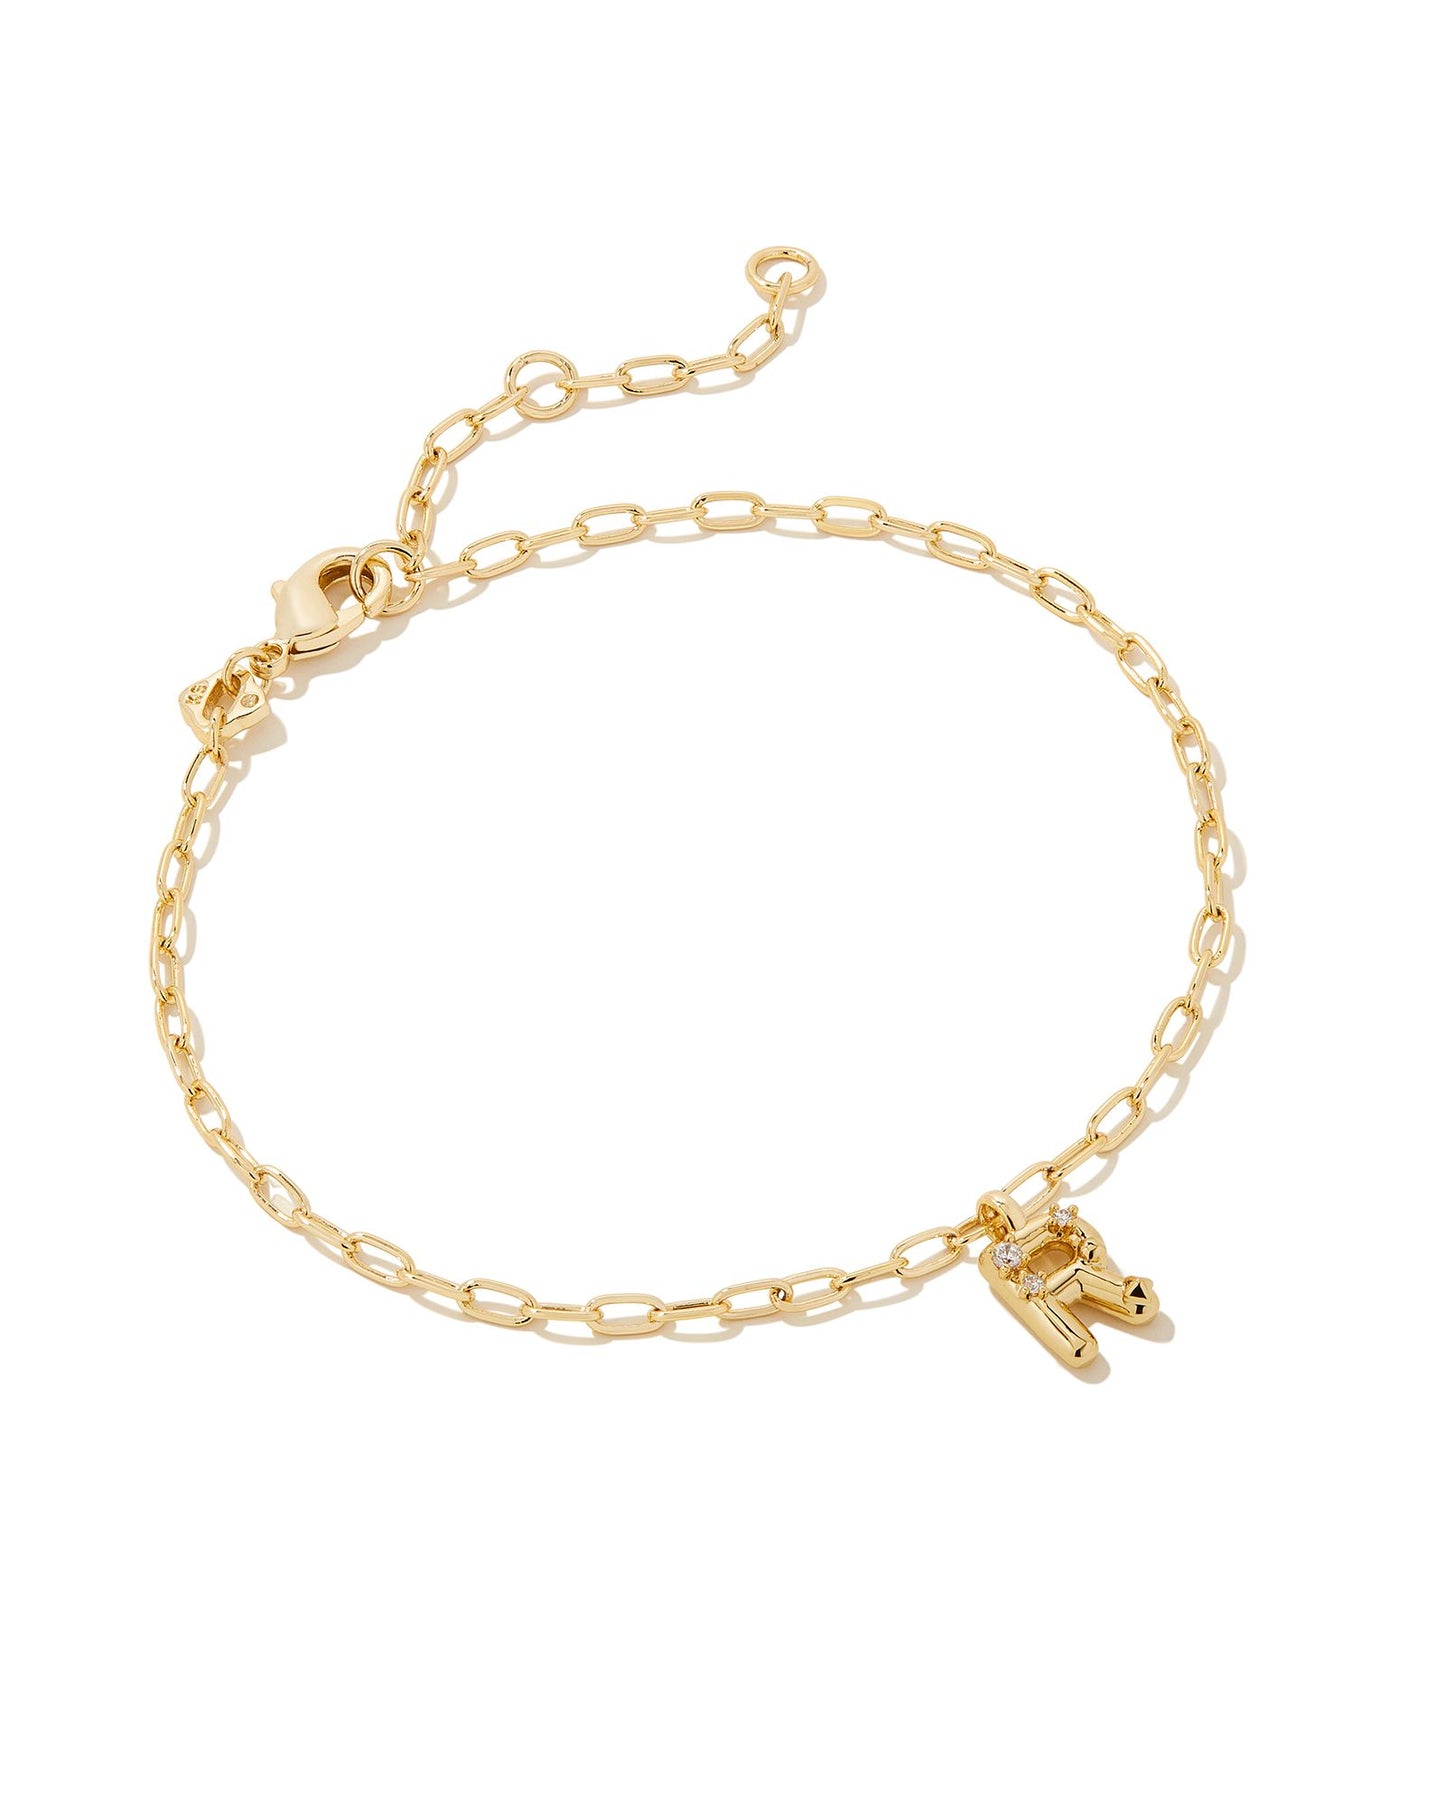 Add a personal touch to your wrist stack with the Crystal Delicate Chain Bracelet in White Crystal, our first Fashion Jewelry initial bracelet. Featuring a dainty chain and letter charm with a hint of sparkle, this bracelet is the perfect way to celebrate the ones you love—including yourself!  Dimensions- 6.5' CHAIN WITH 1.5' EXTENDER, 0.45'L X 0.26"W PENDANT Metal- 14K Gold plated over brass Closure- Lobster Clasp Material-  White CZ Letter R